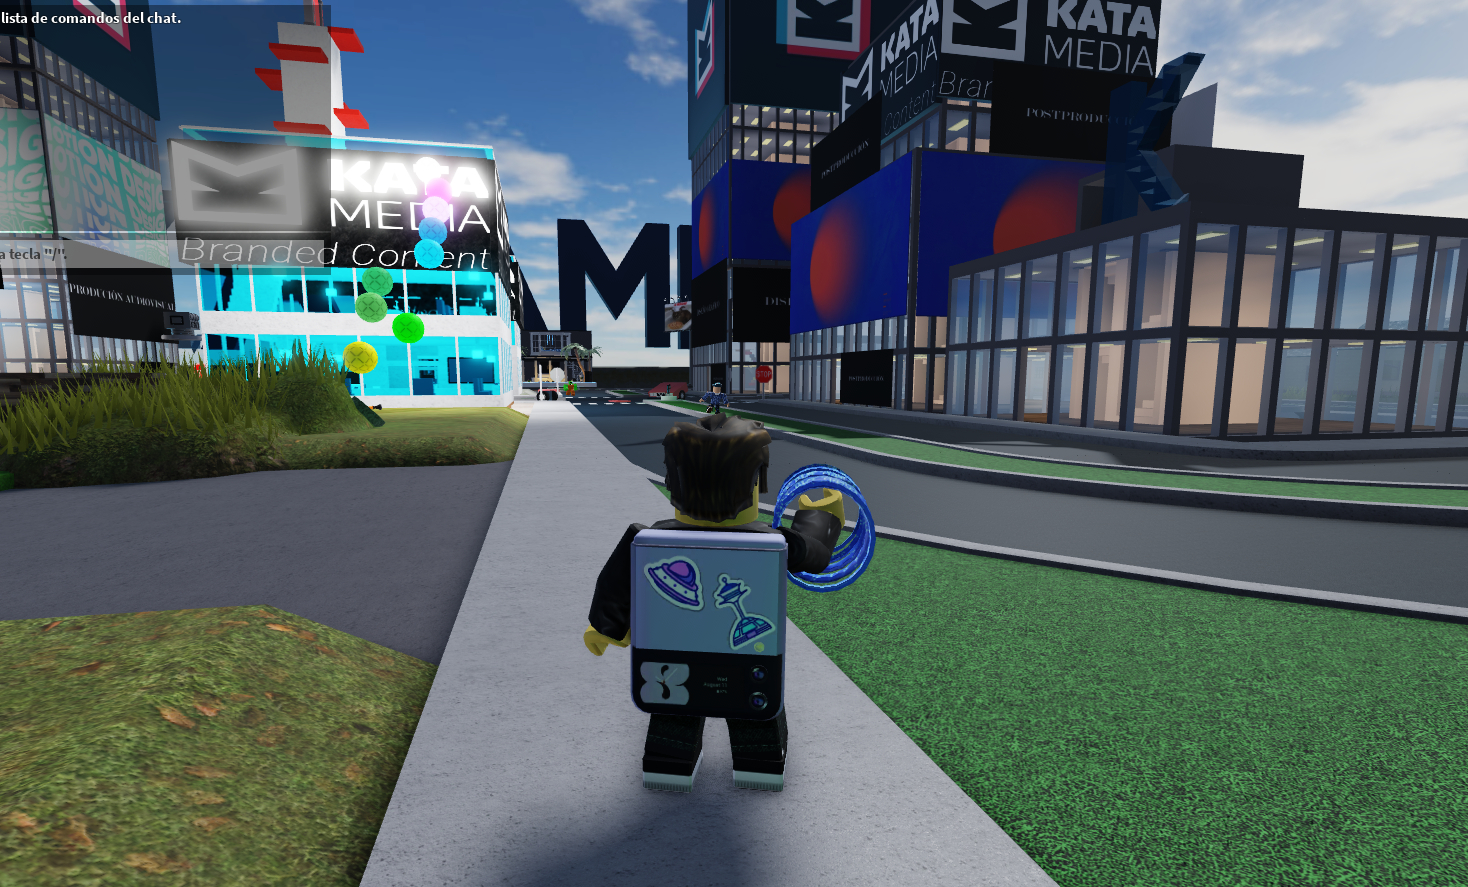 GAMIFICATION IN THE METAVERSE